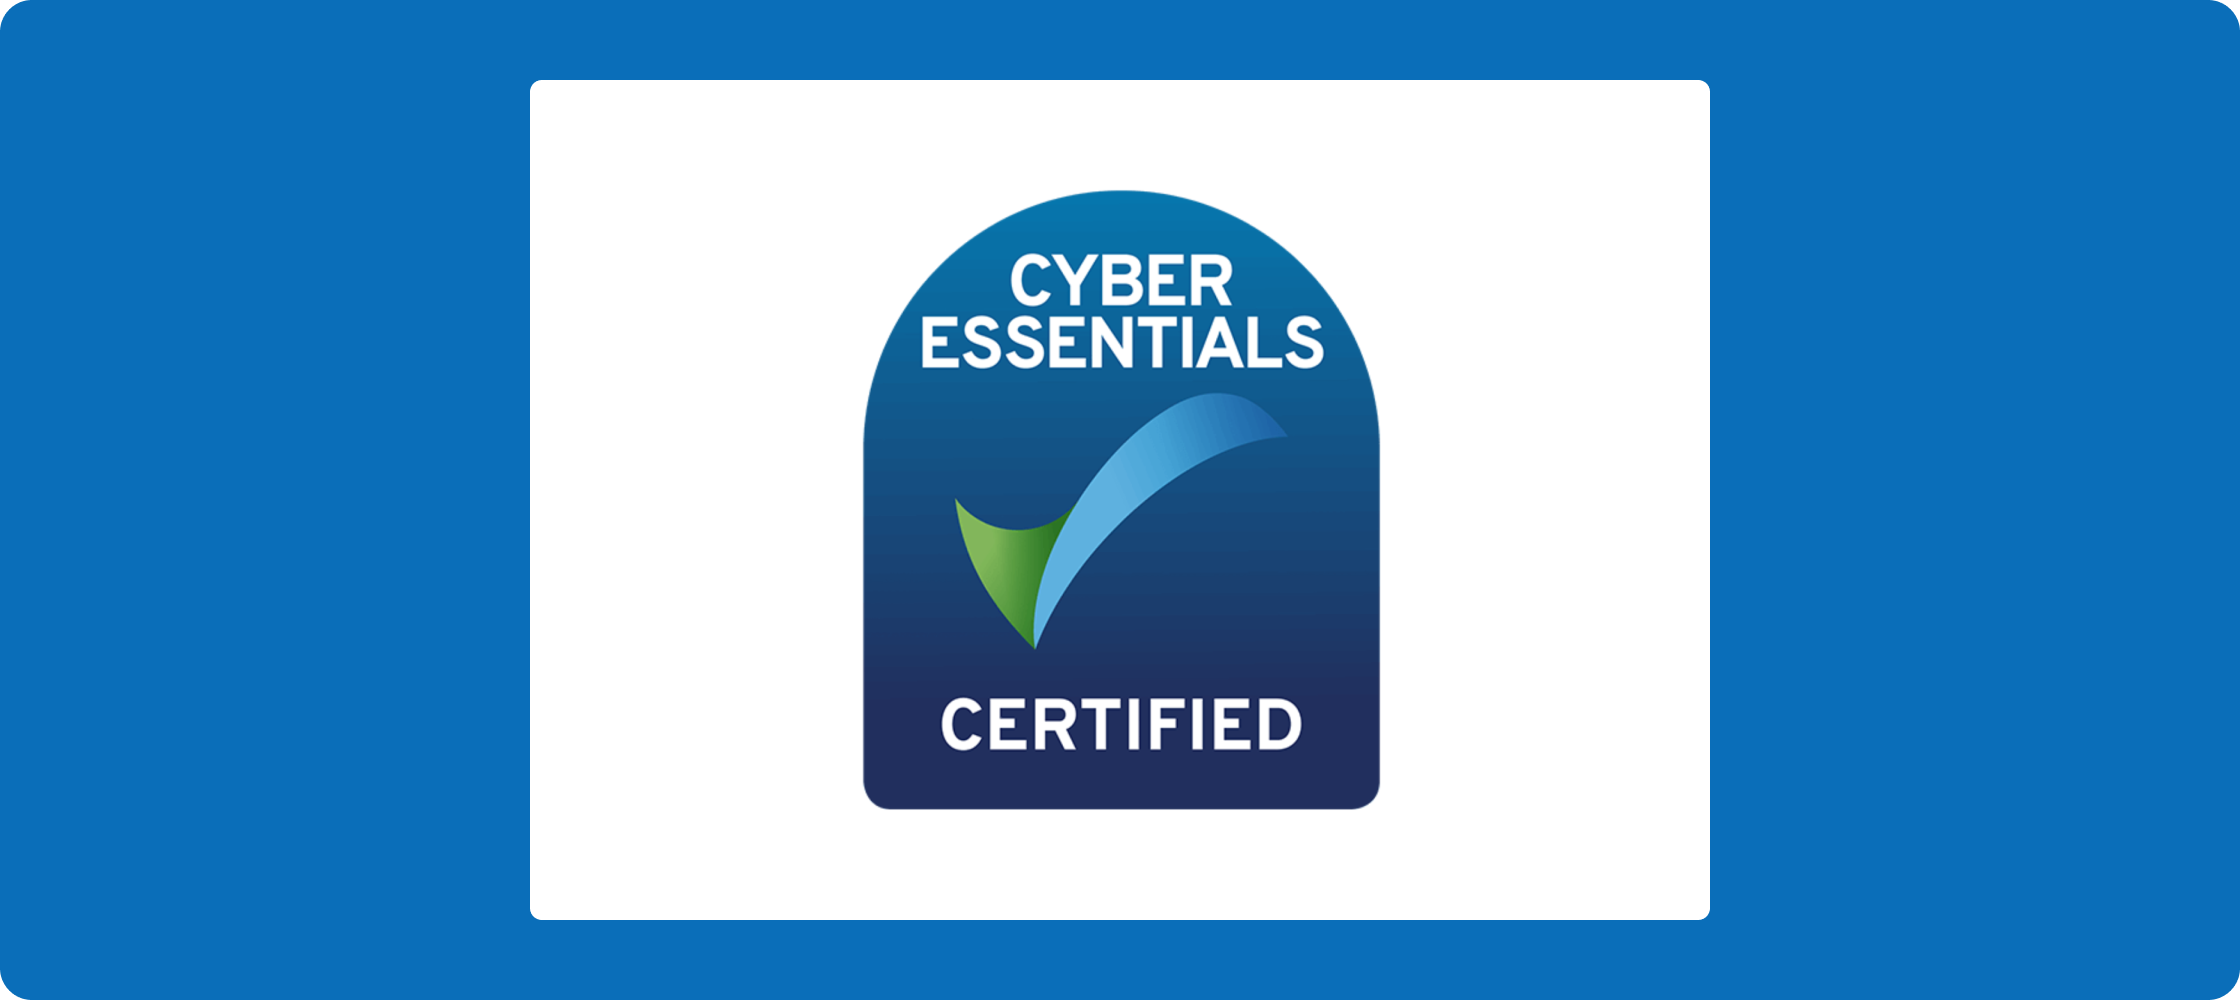 Cyber Essentials - Cover Image.png